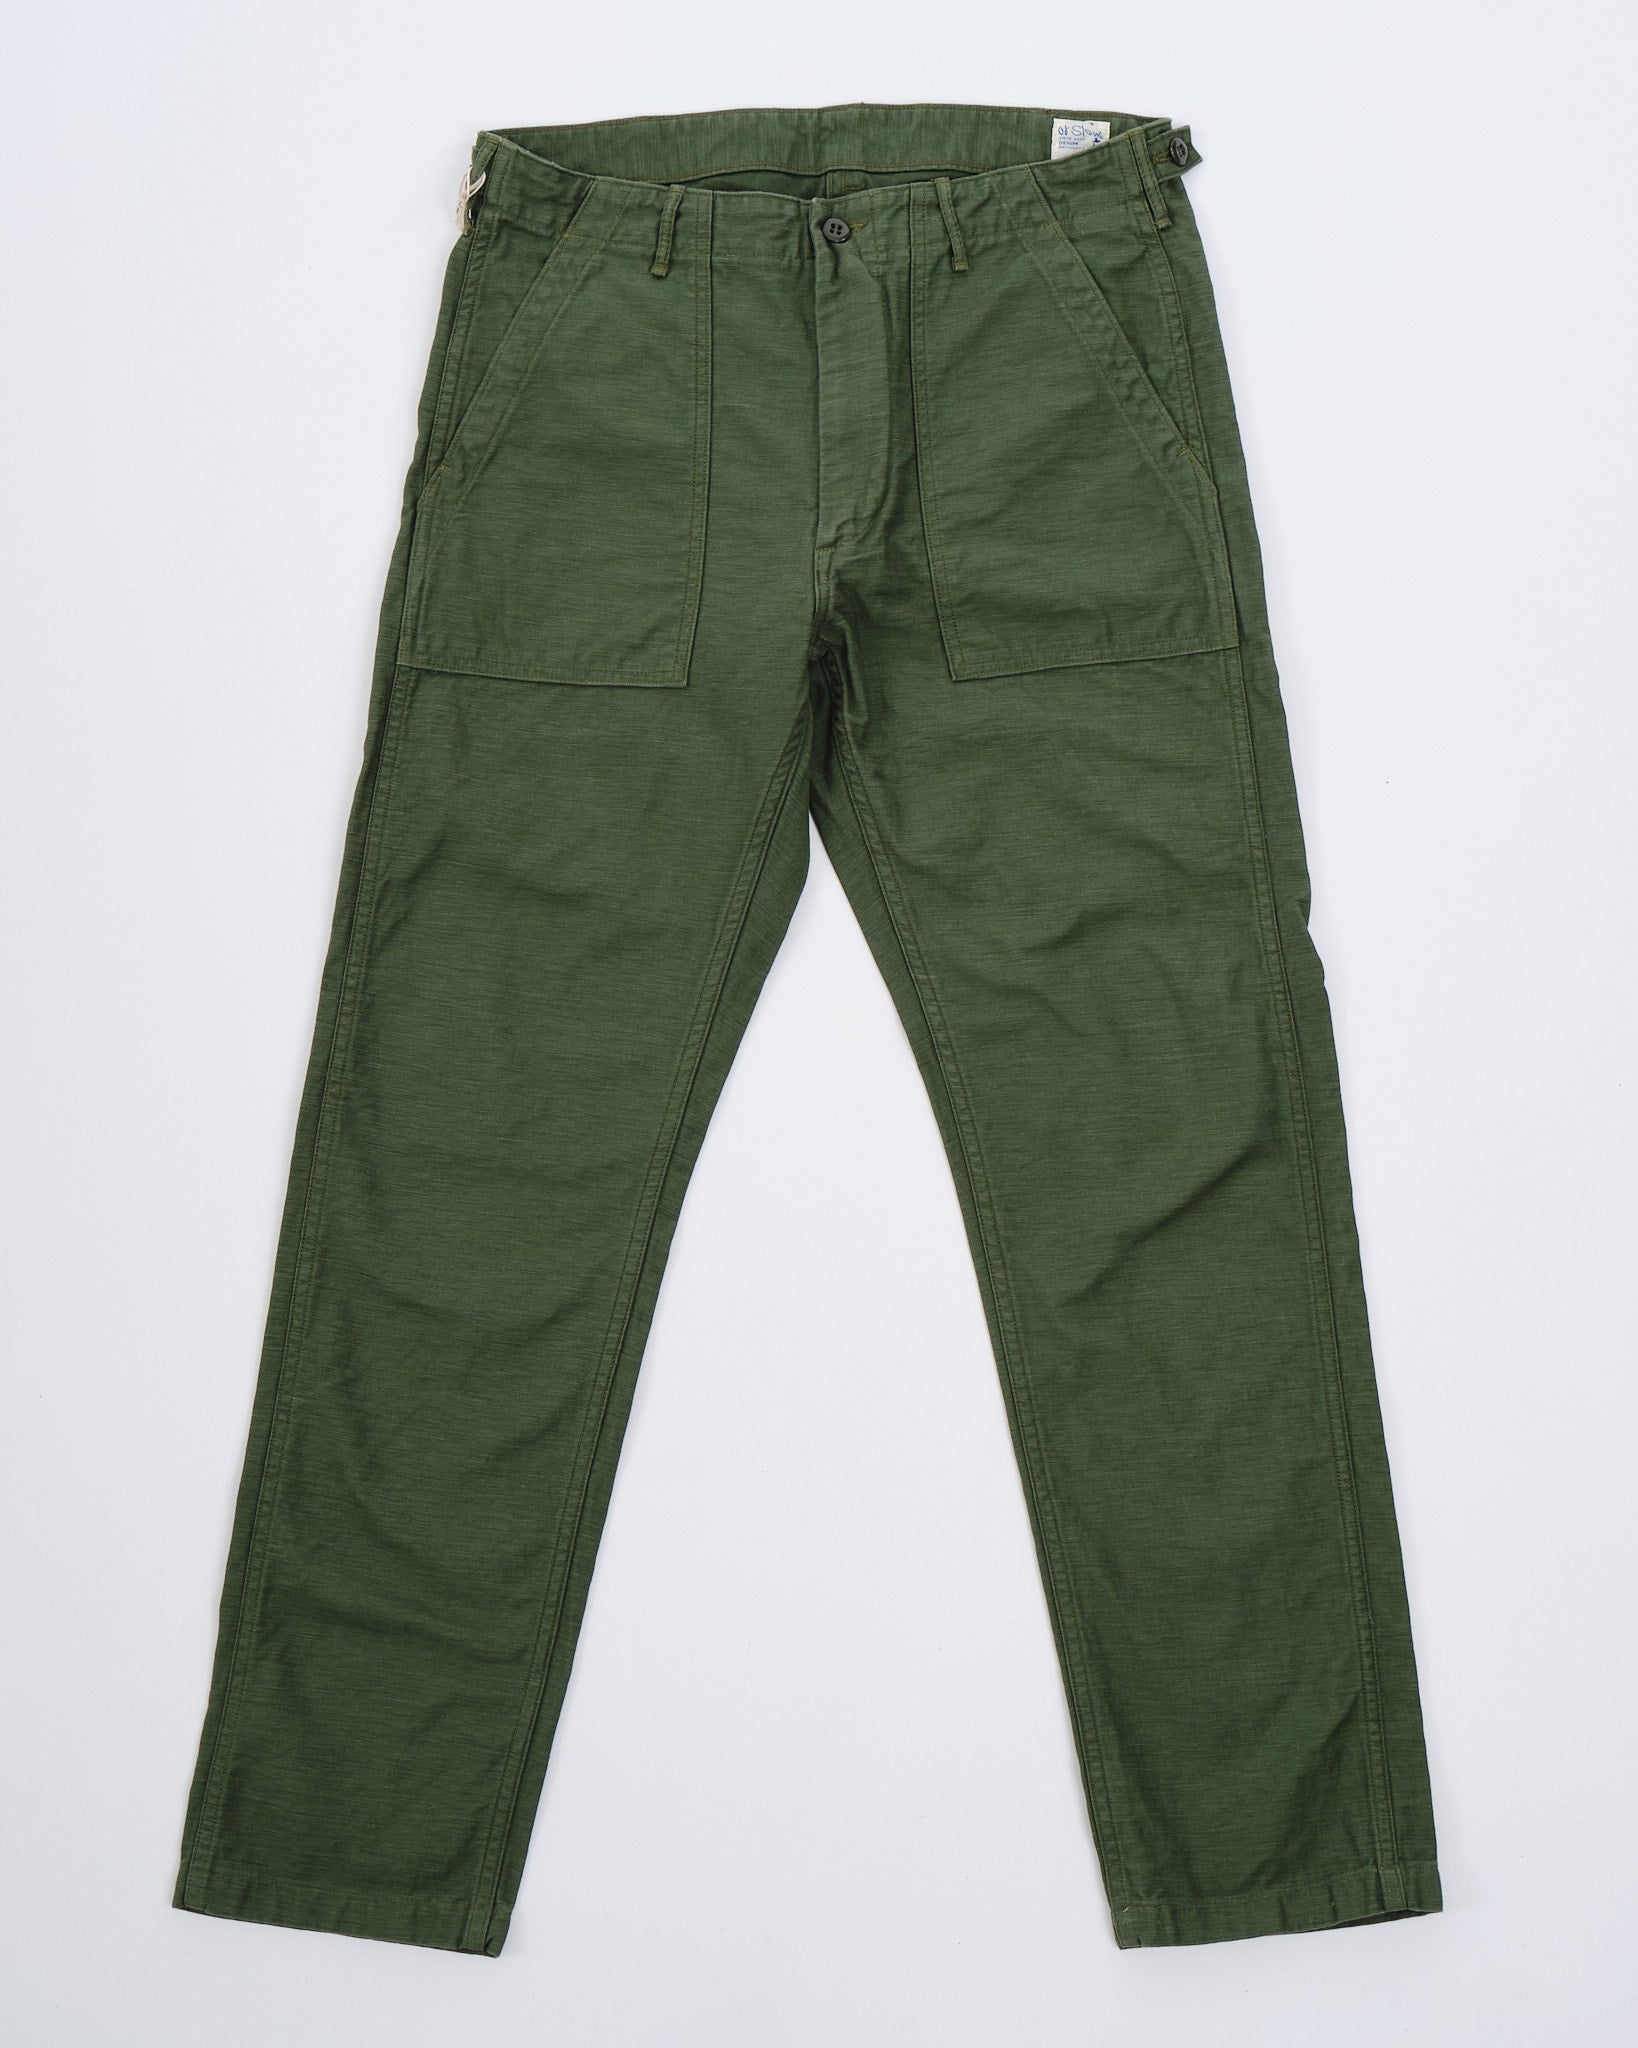 OrSlow US Army Fatigue Pants Regular Ripstop Army | Cultizm